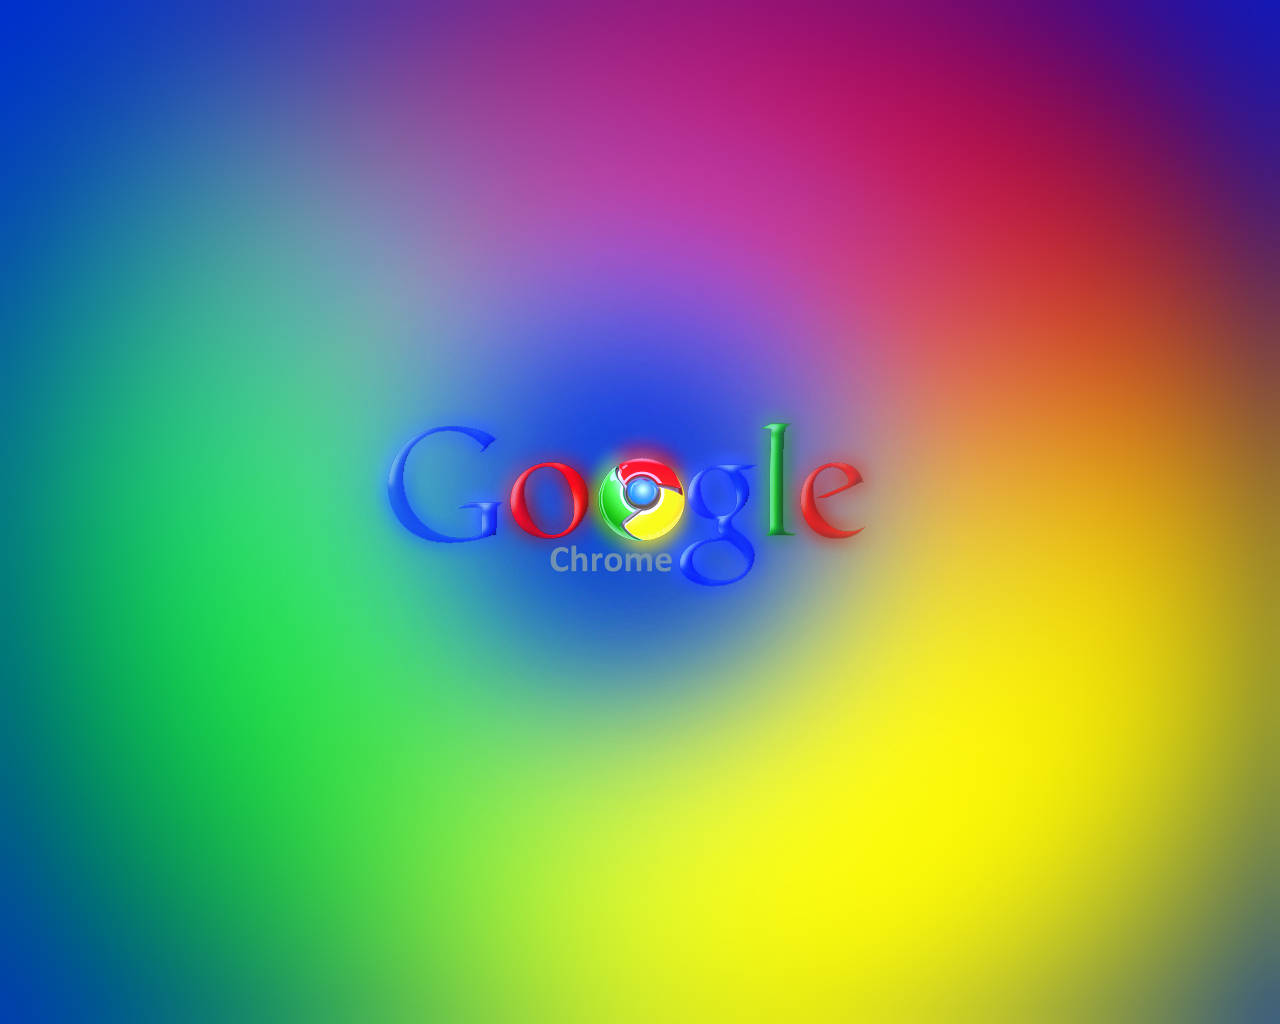 Google Chrome Welcomes You With A Unique And Colorful Rainbow Wallpaper